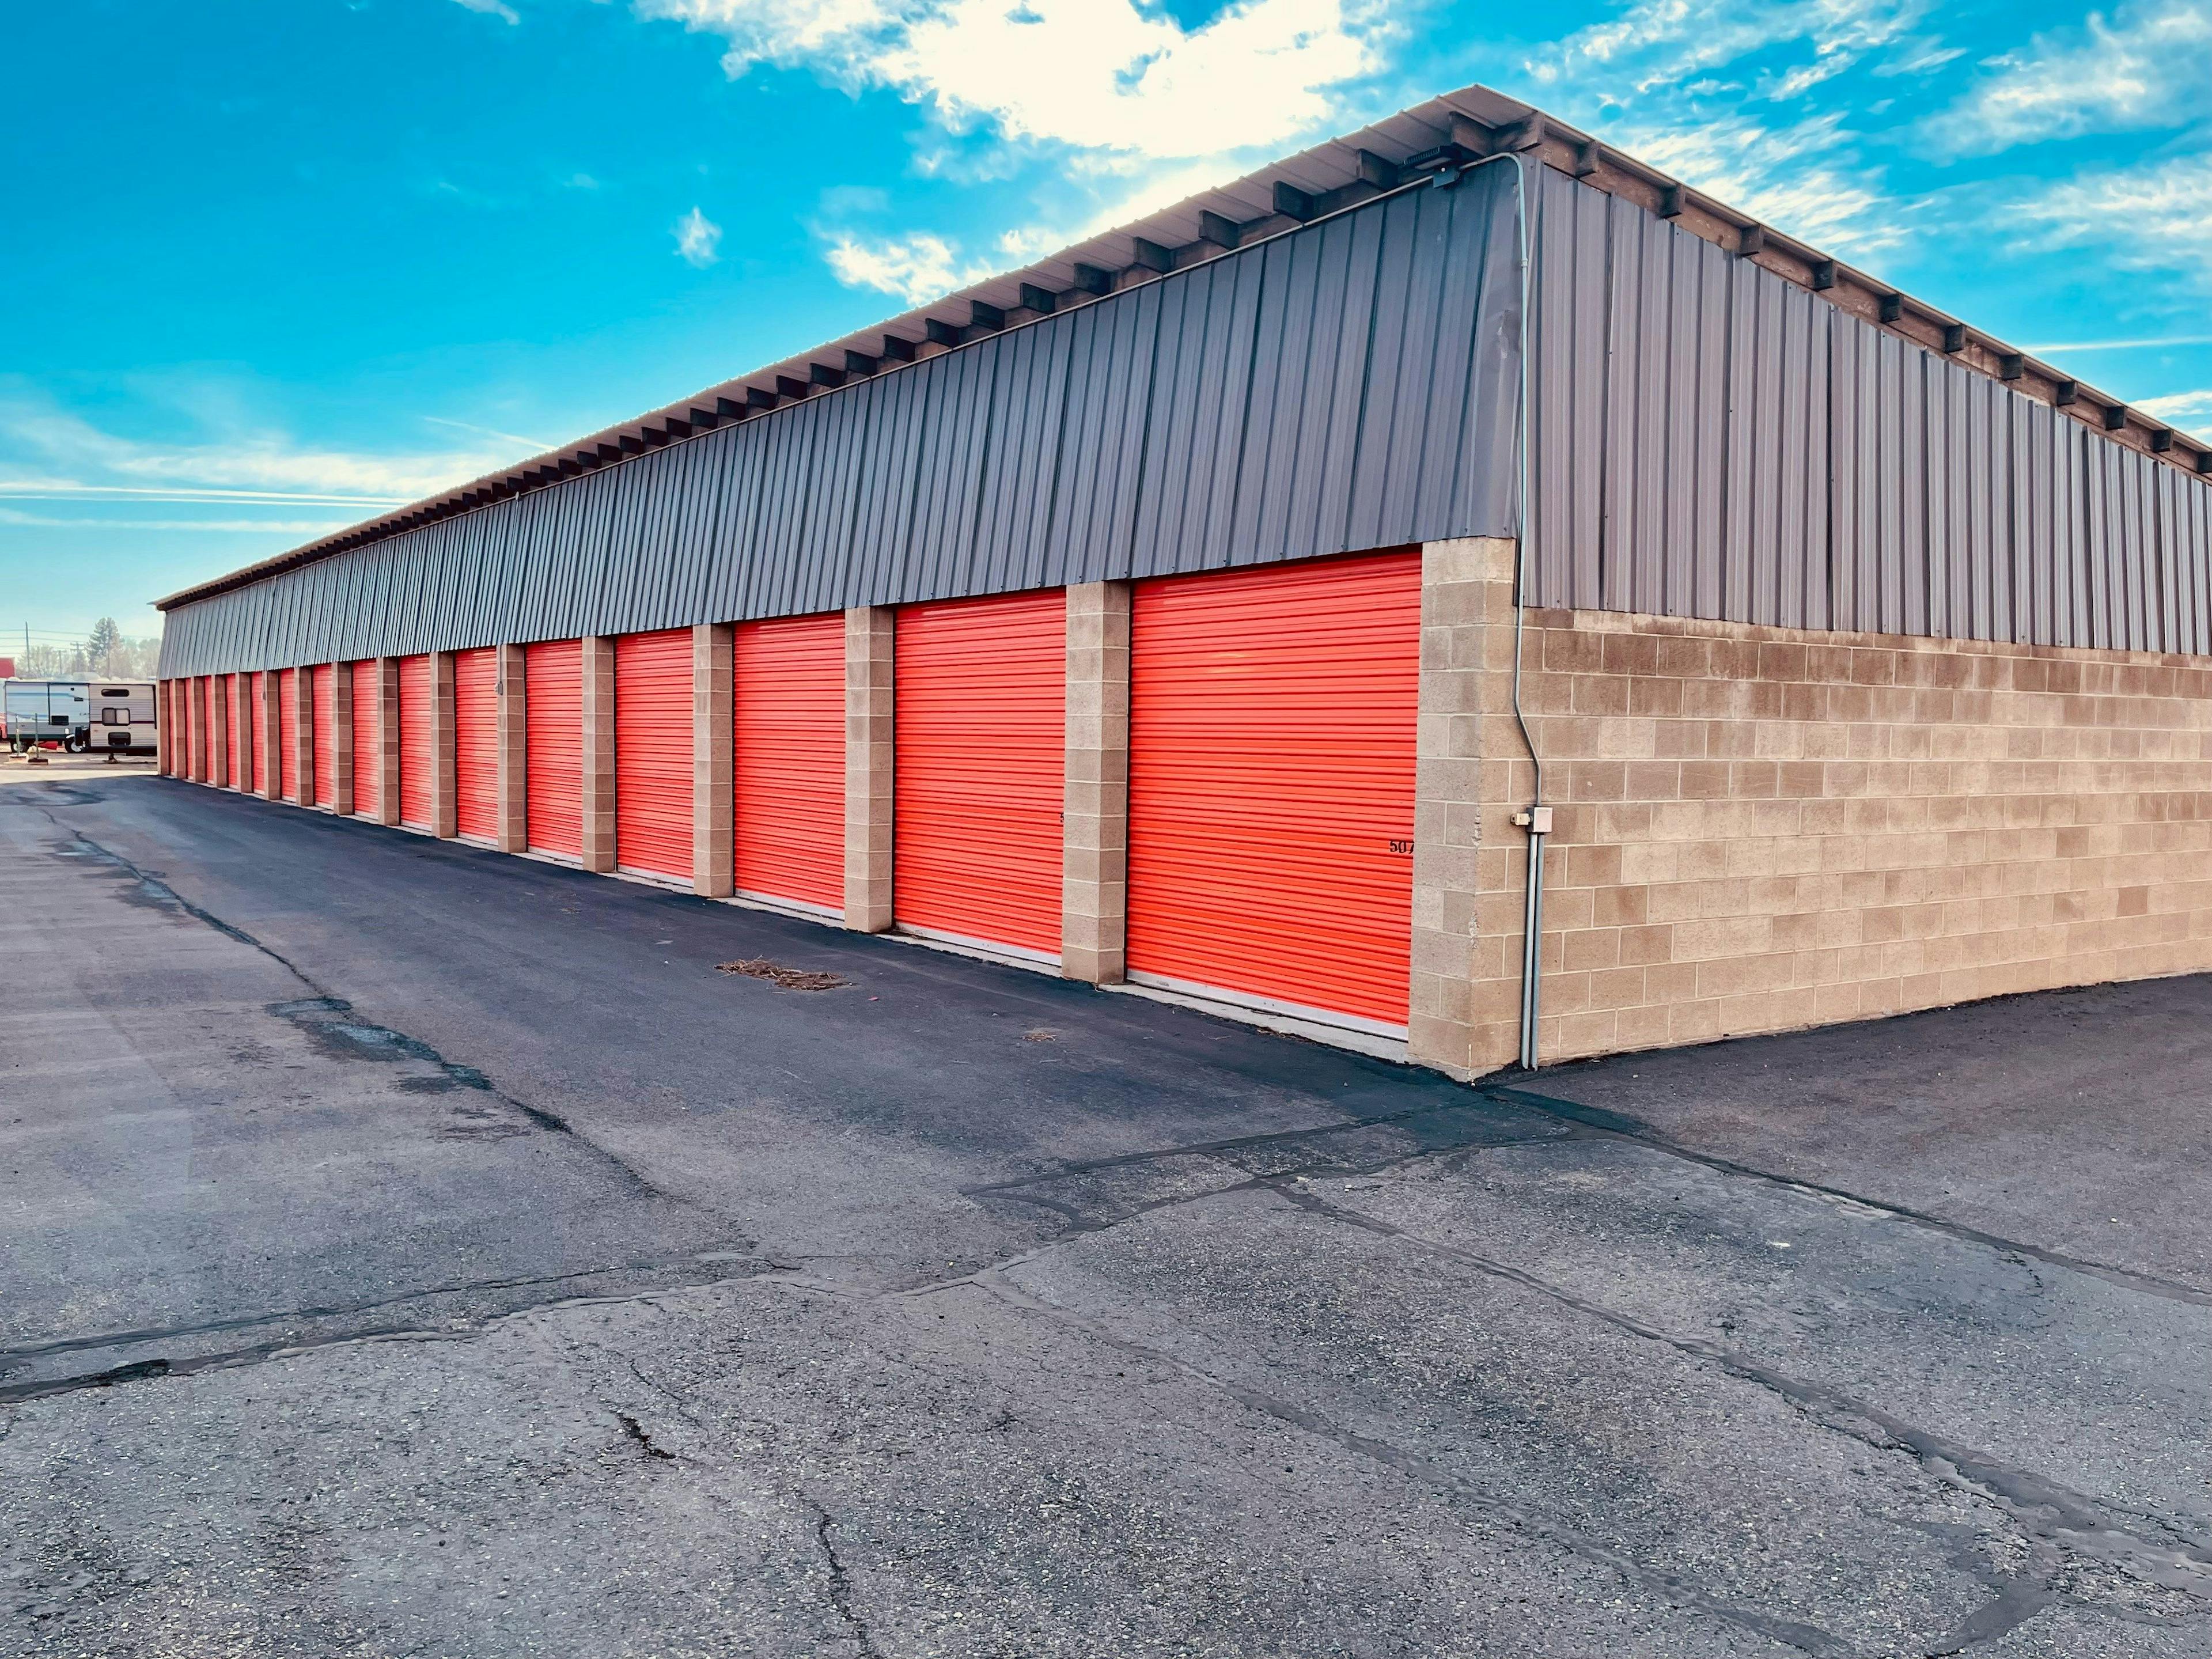 7 Reasons to Invest in Self-Storage Real Estate